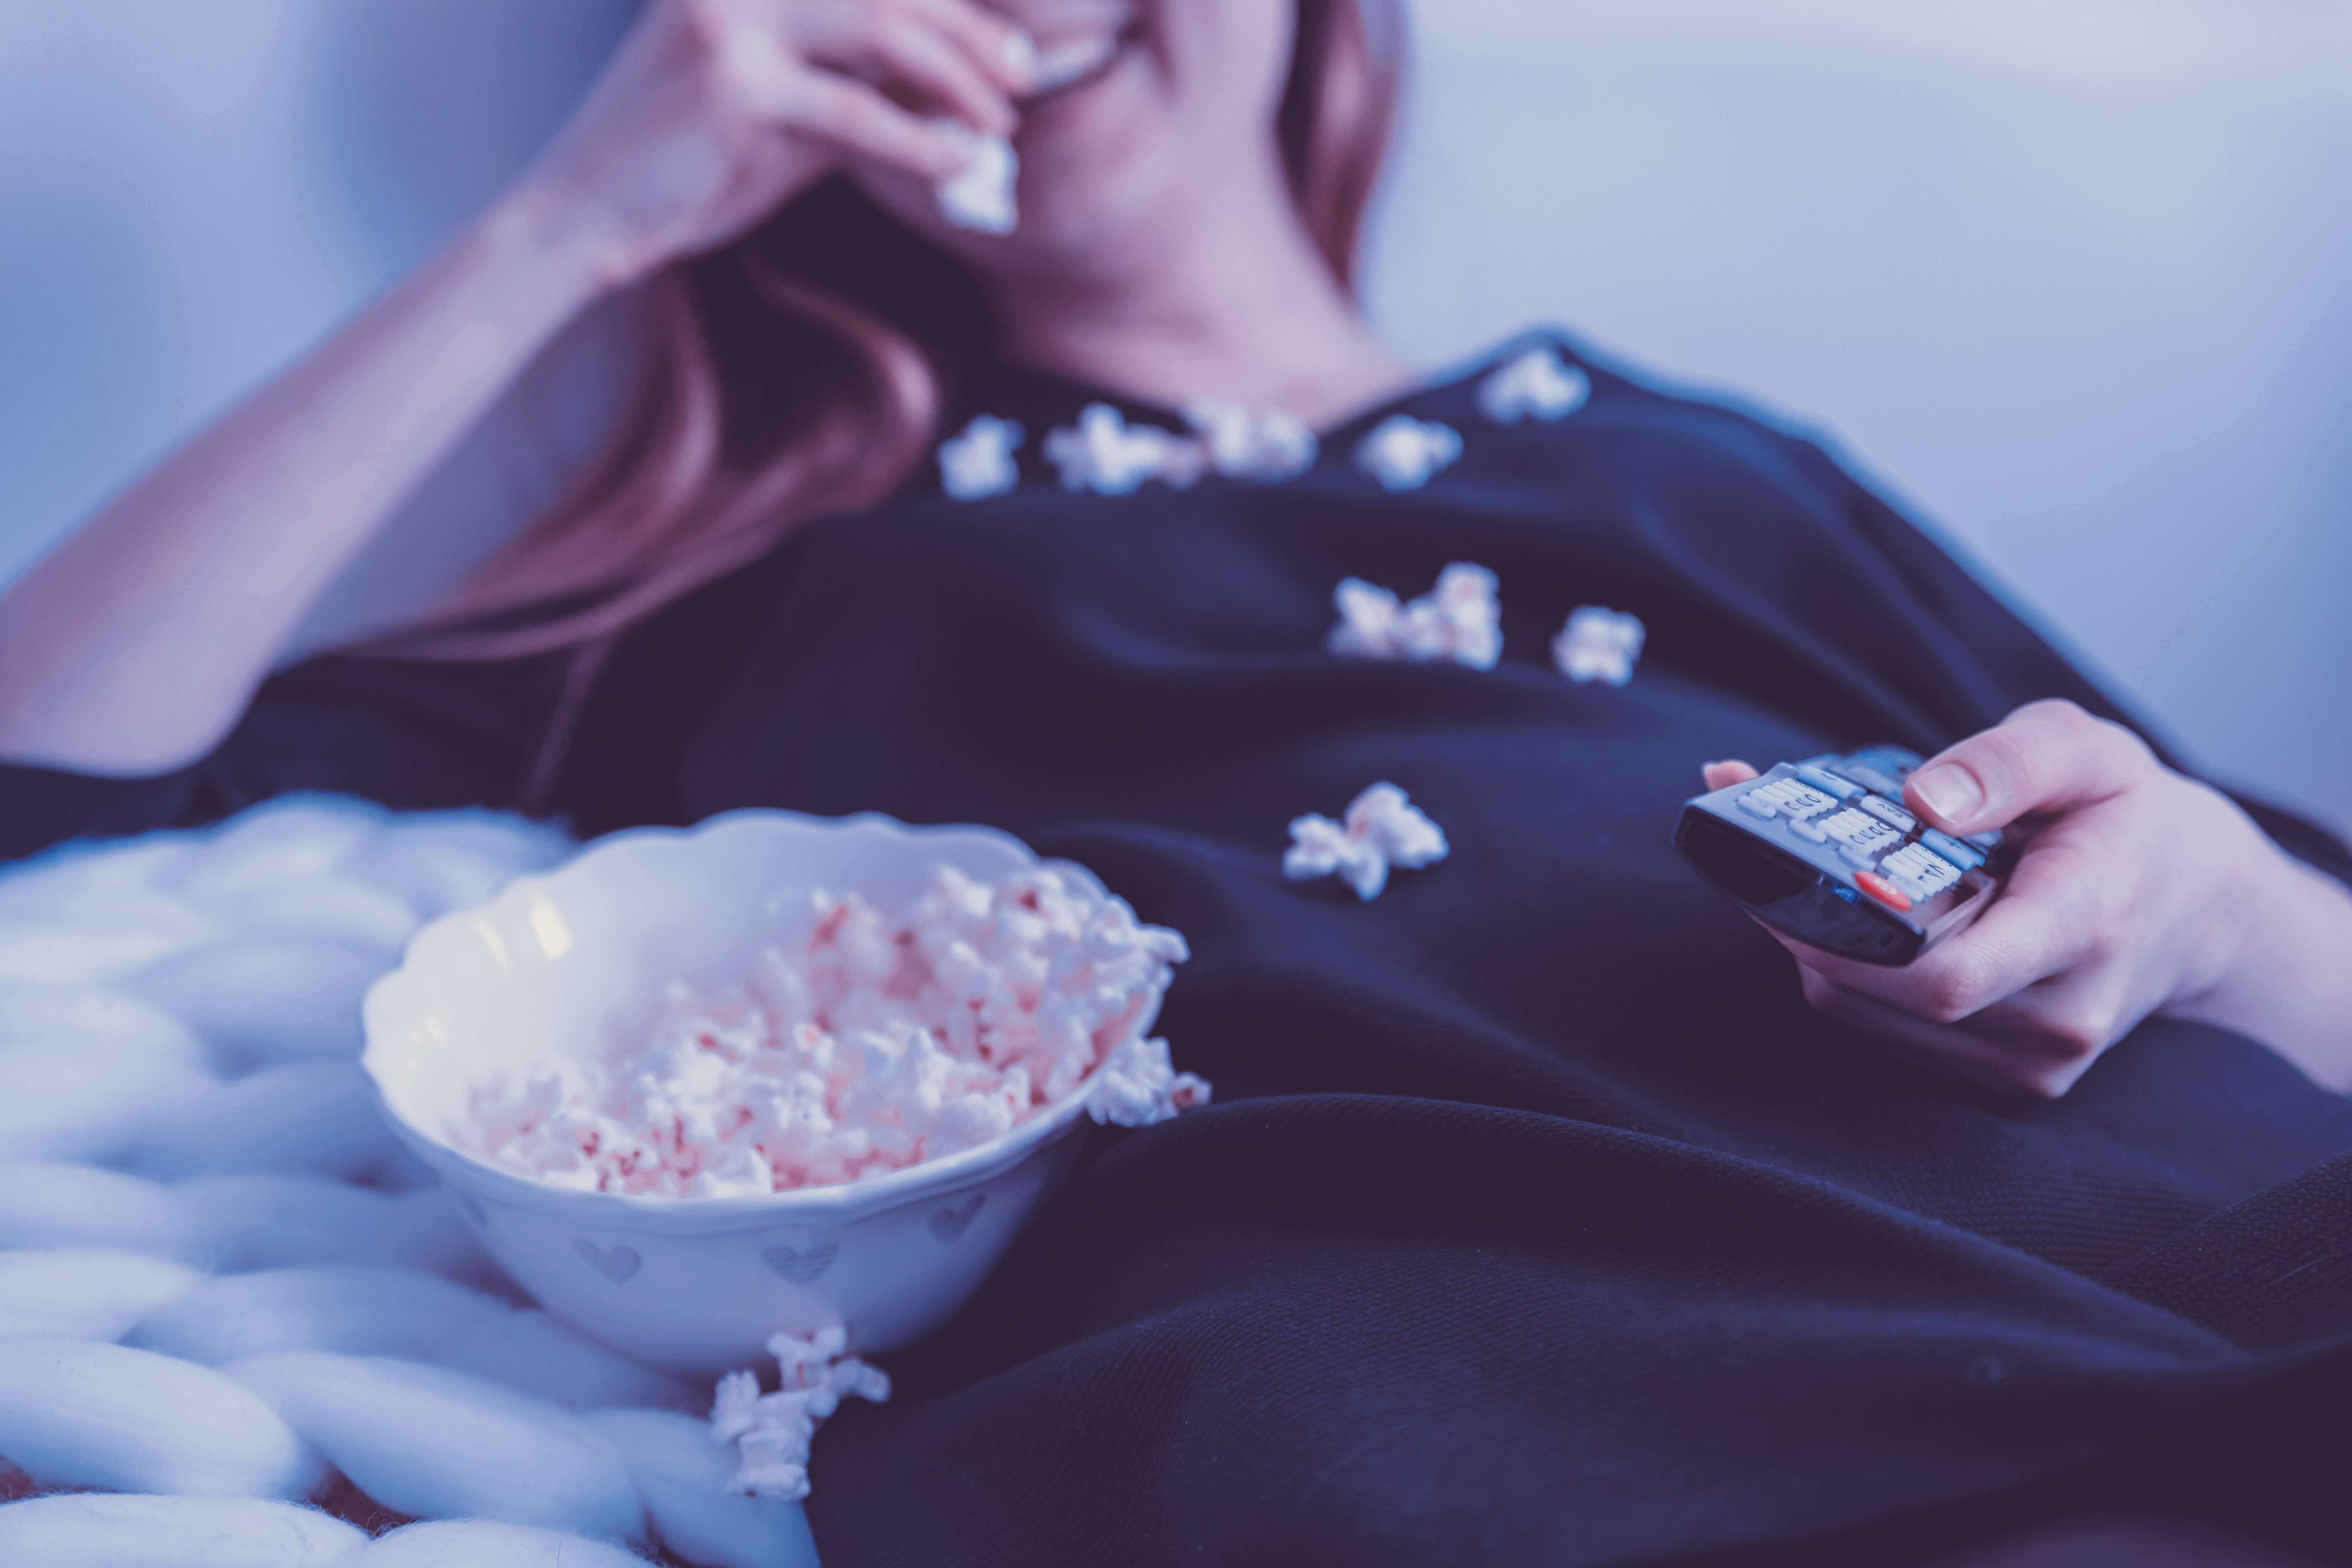 WATCH: 3 hacks for curbing your late-night cravings